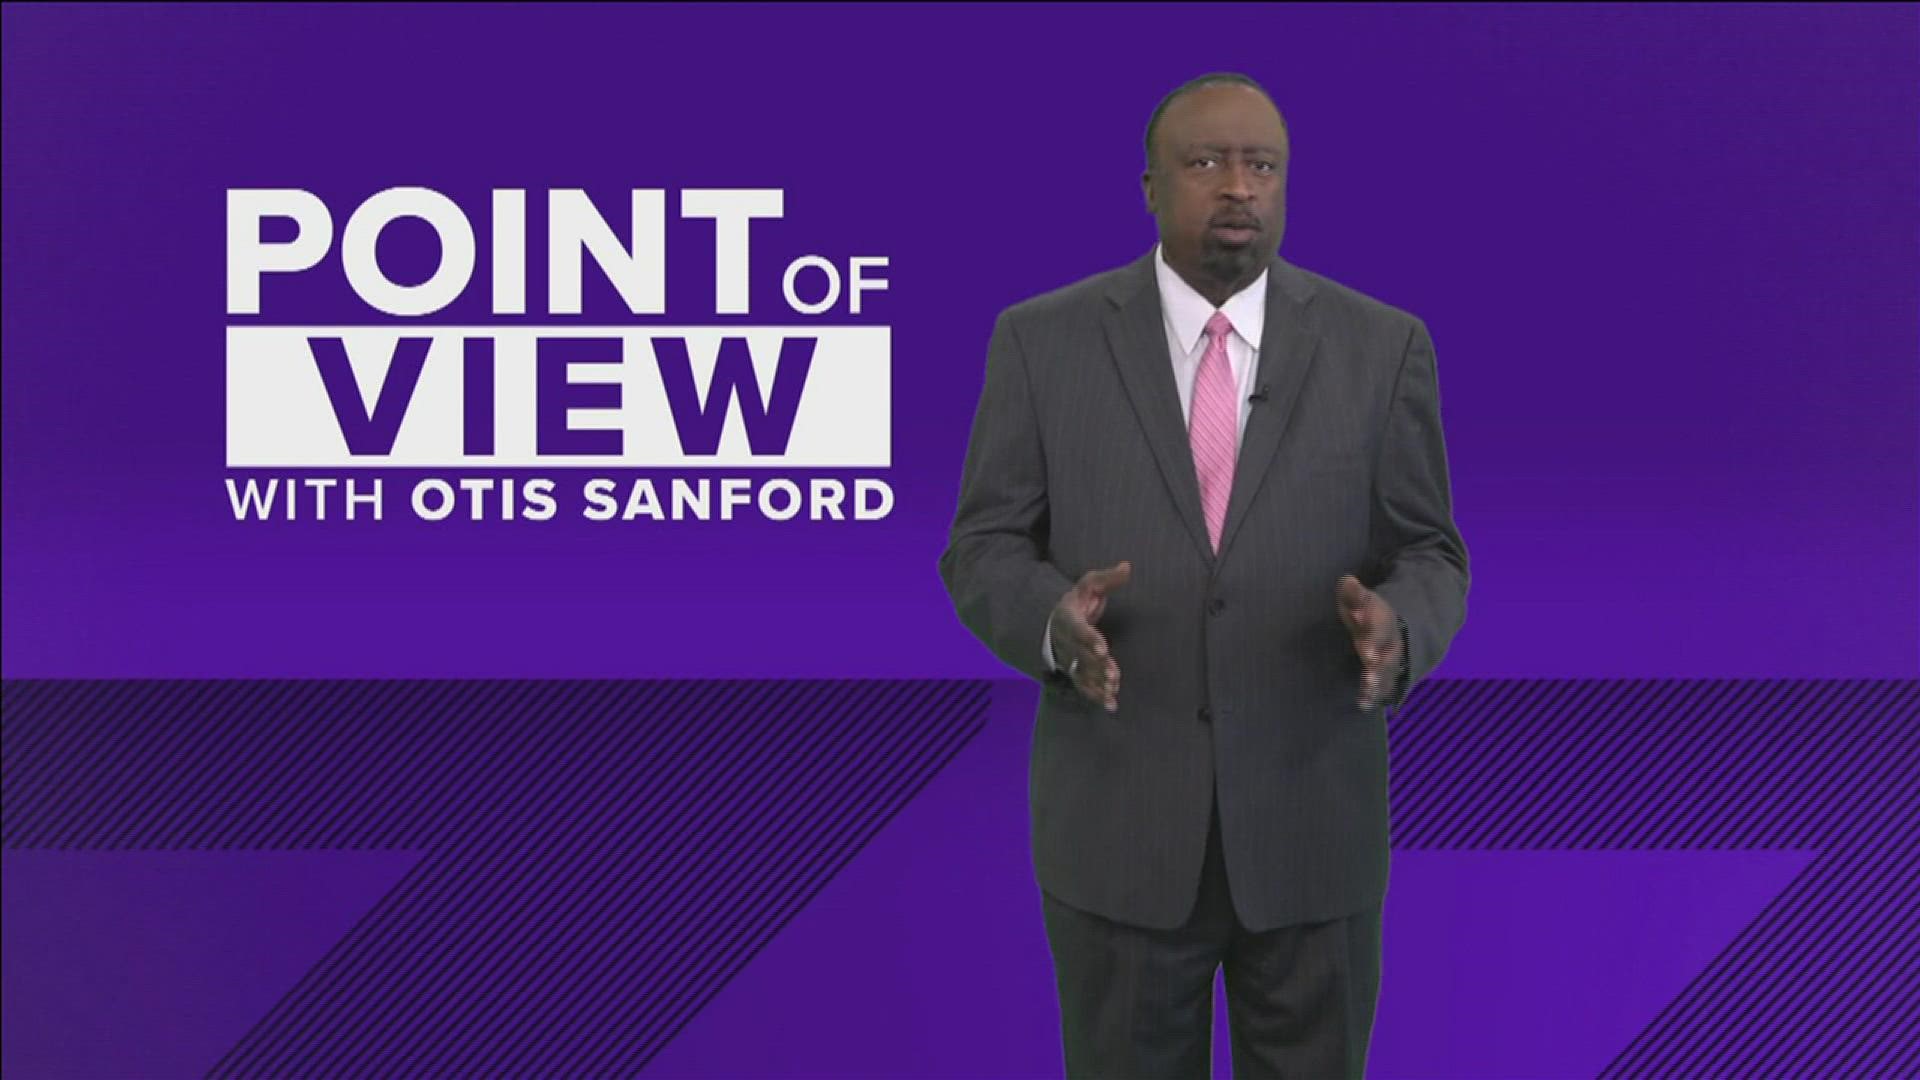 ABC24 political analyst & commentator Otis Sanford shared his point of view on the anniversary of the announcement of Ford’s BlueOval City coming to West Tennessee.